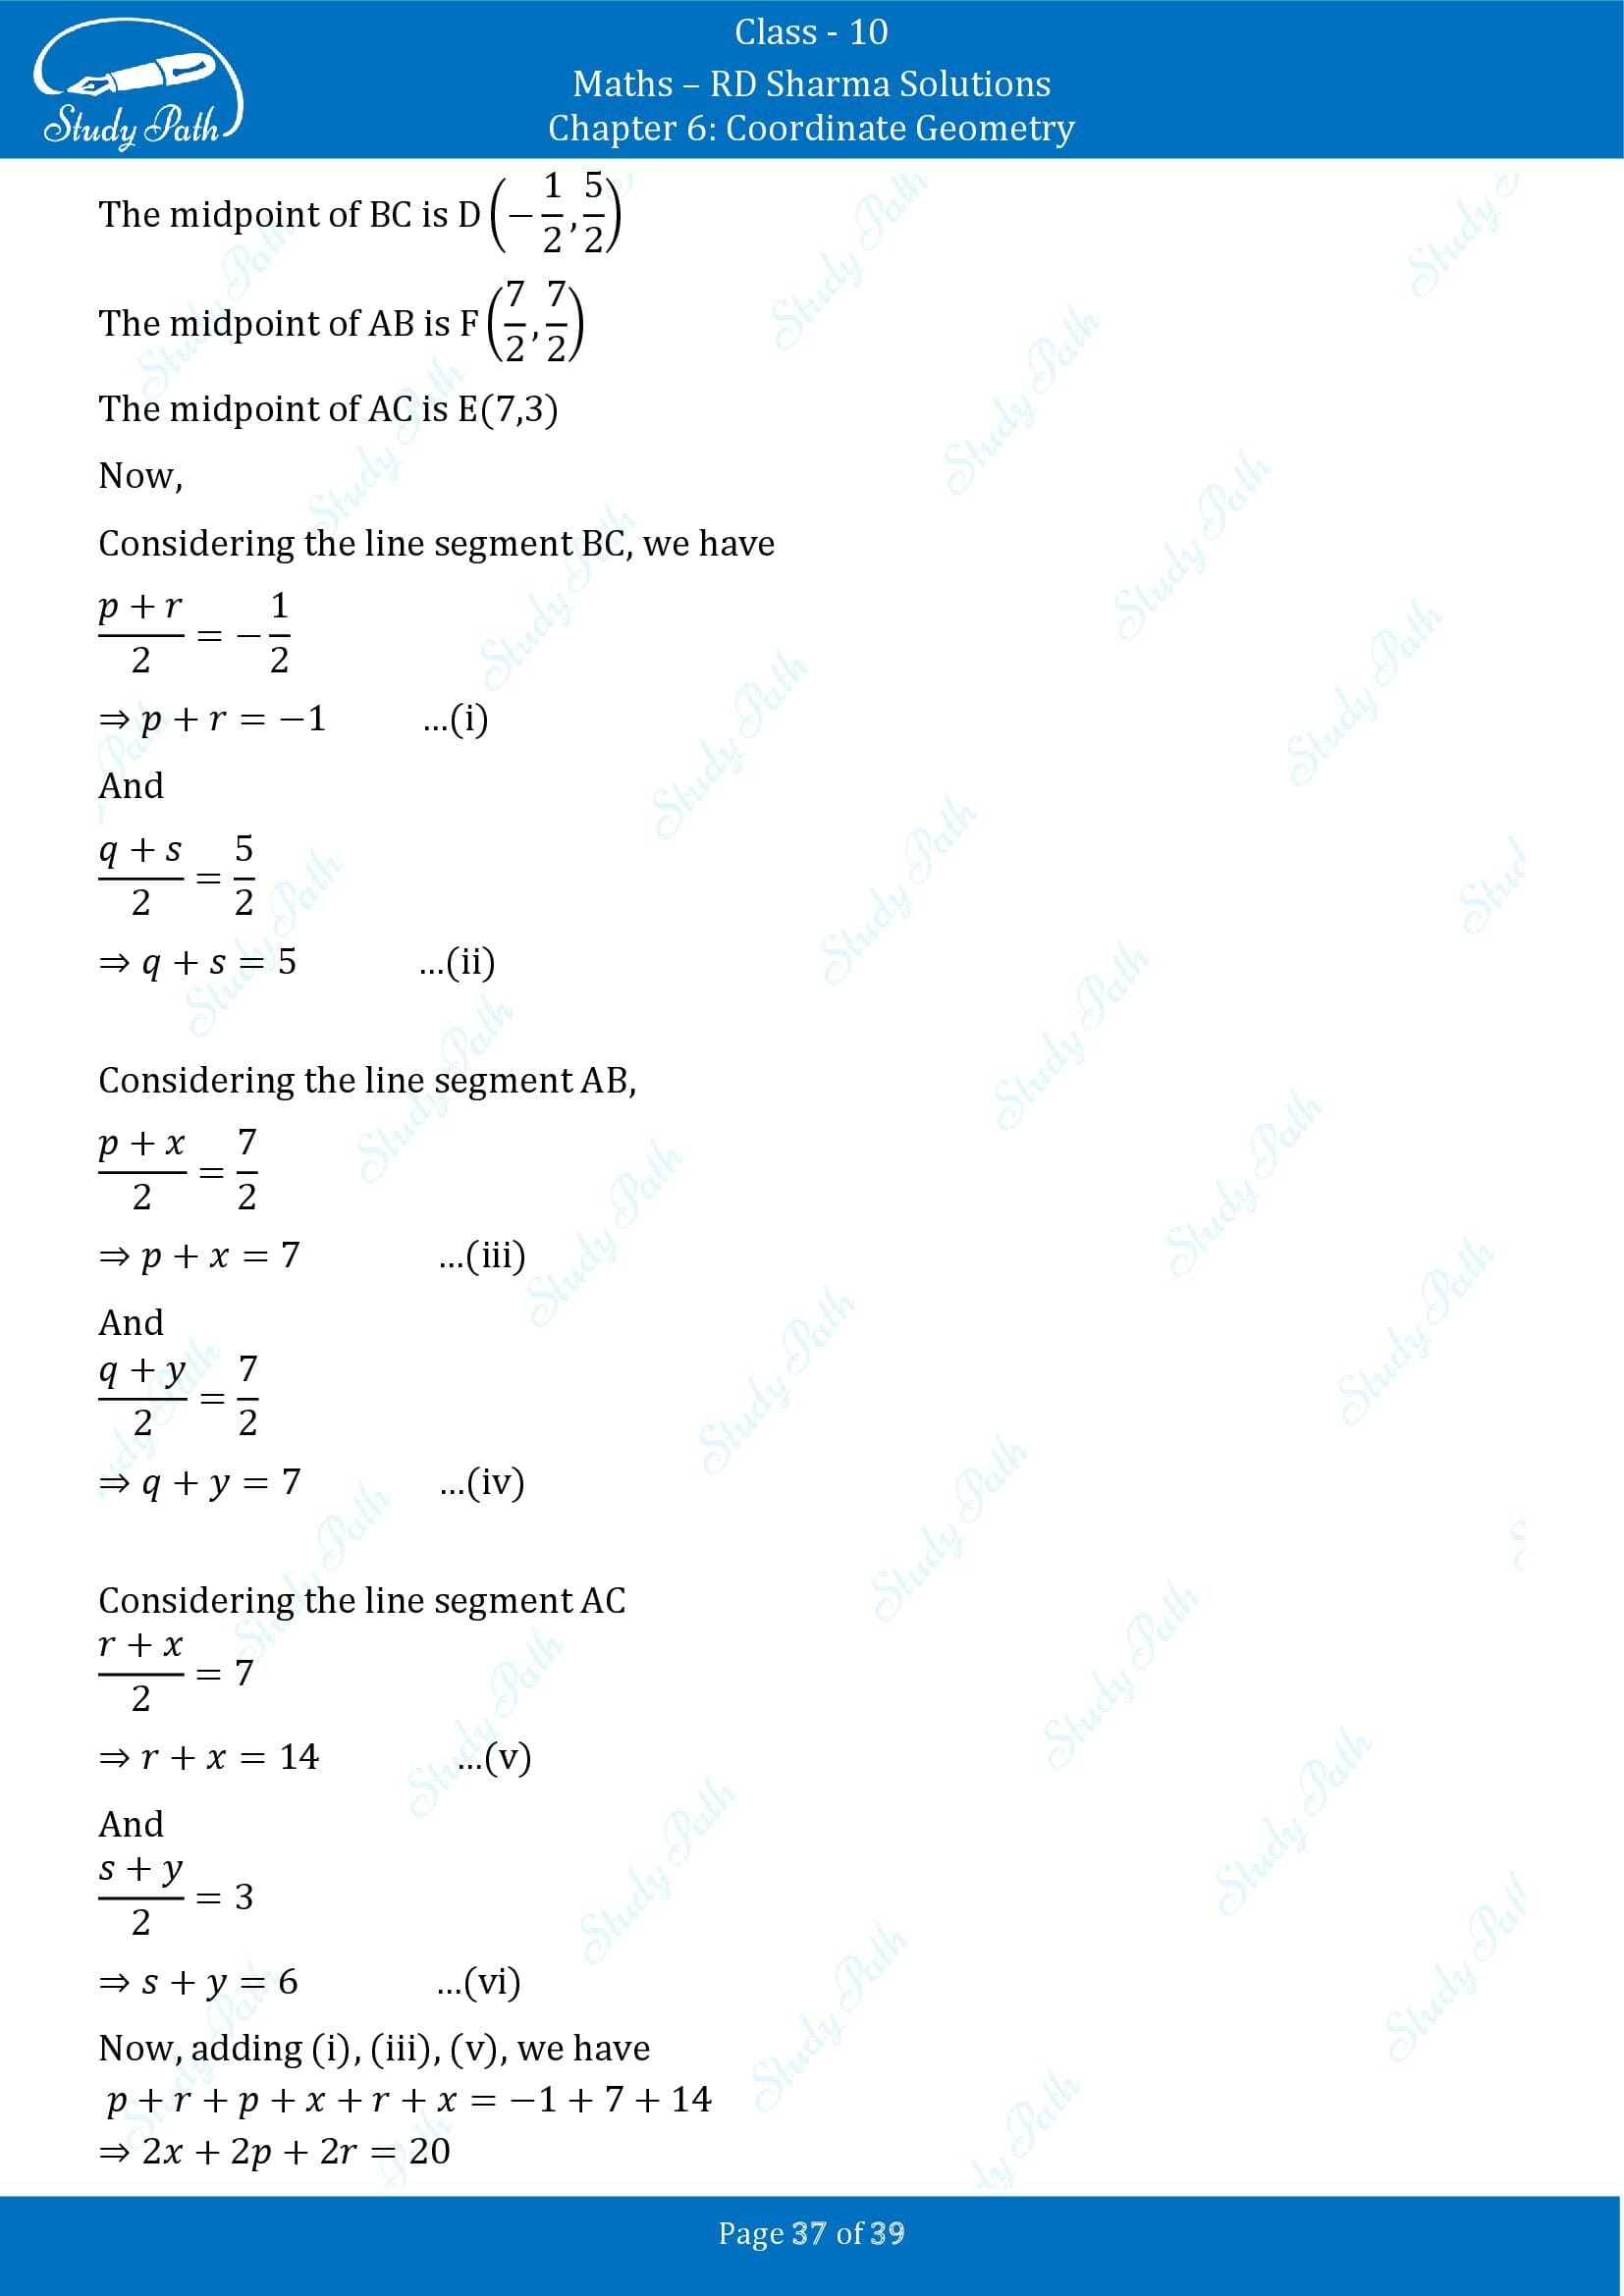 RD Sharma Solutions Class 10 Chapter 6 Coordinate Geometry Exercise 6.5 0037